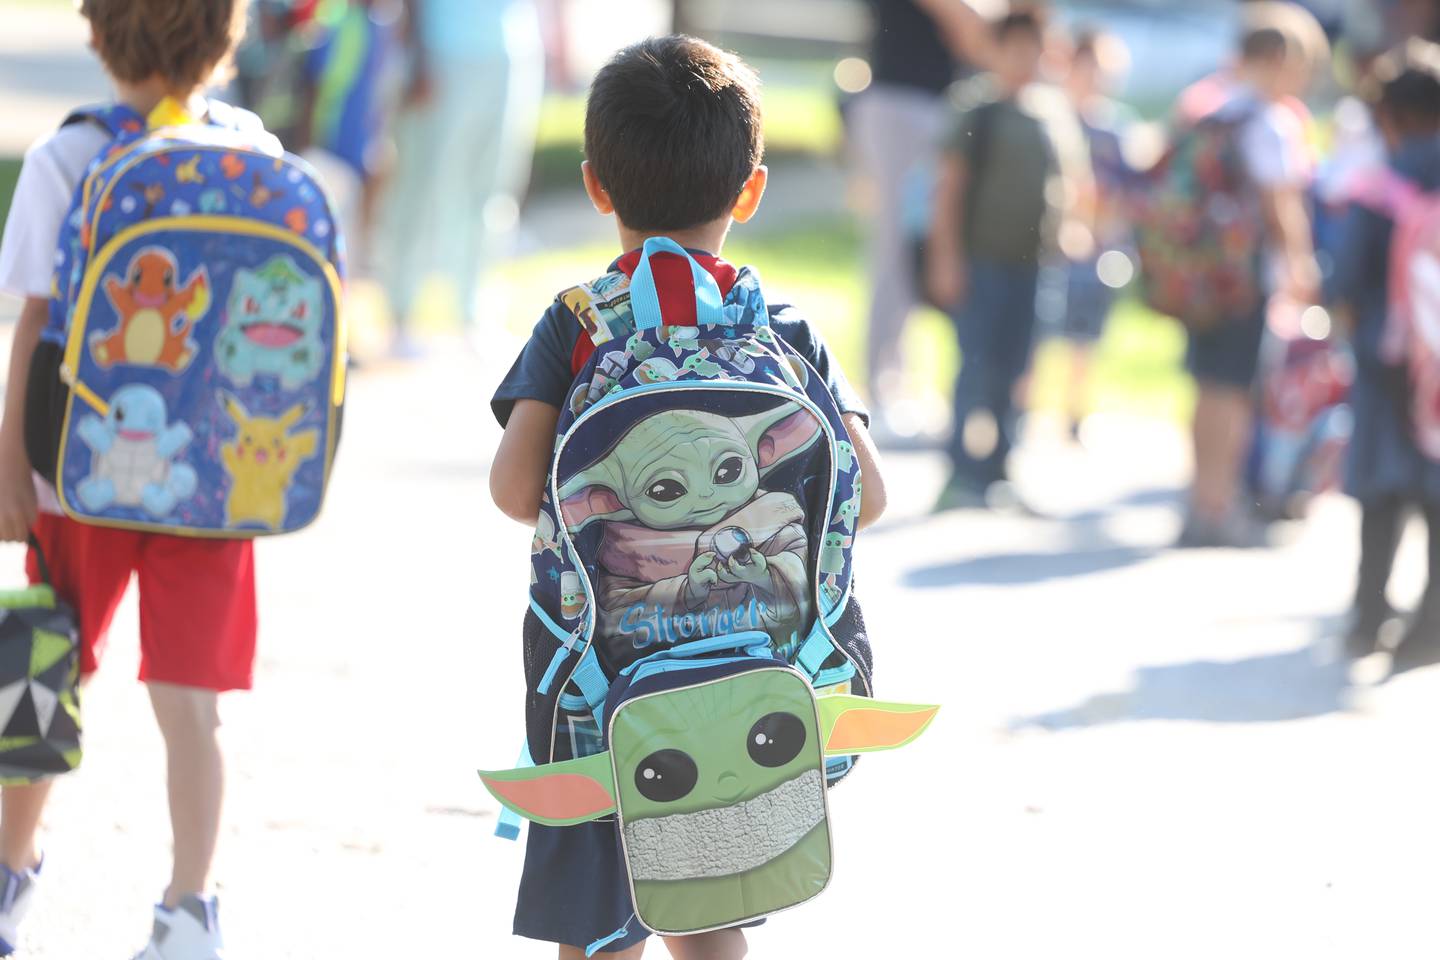 A student carries a themed backpack as he heads to class on the first day of school at Woodland Elementary School in Joliet. Wednesday, Aug. 17, 2022, in Joliet.